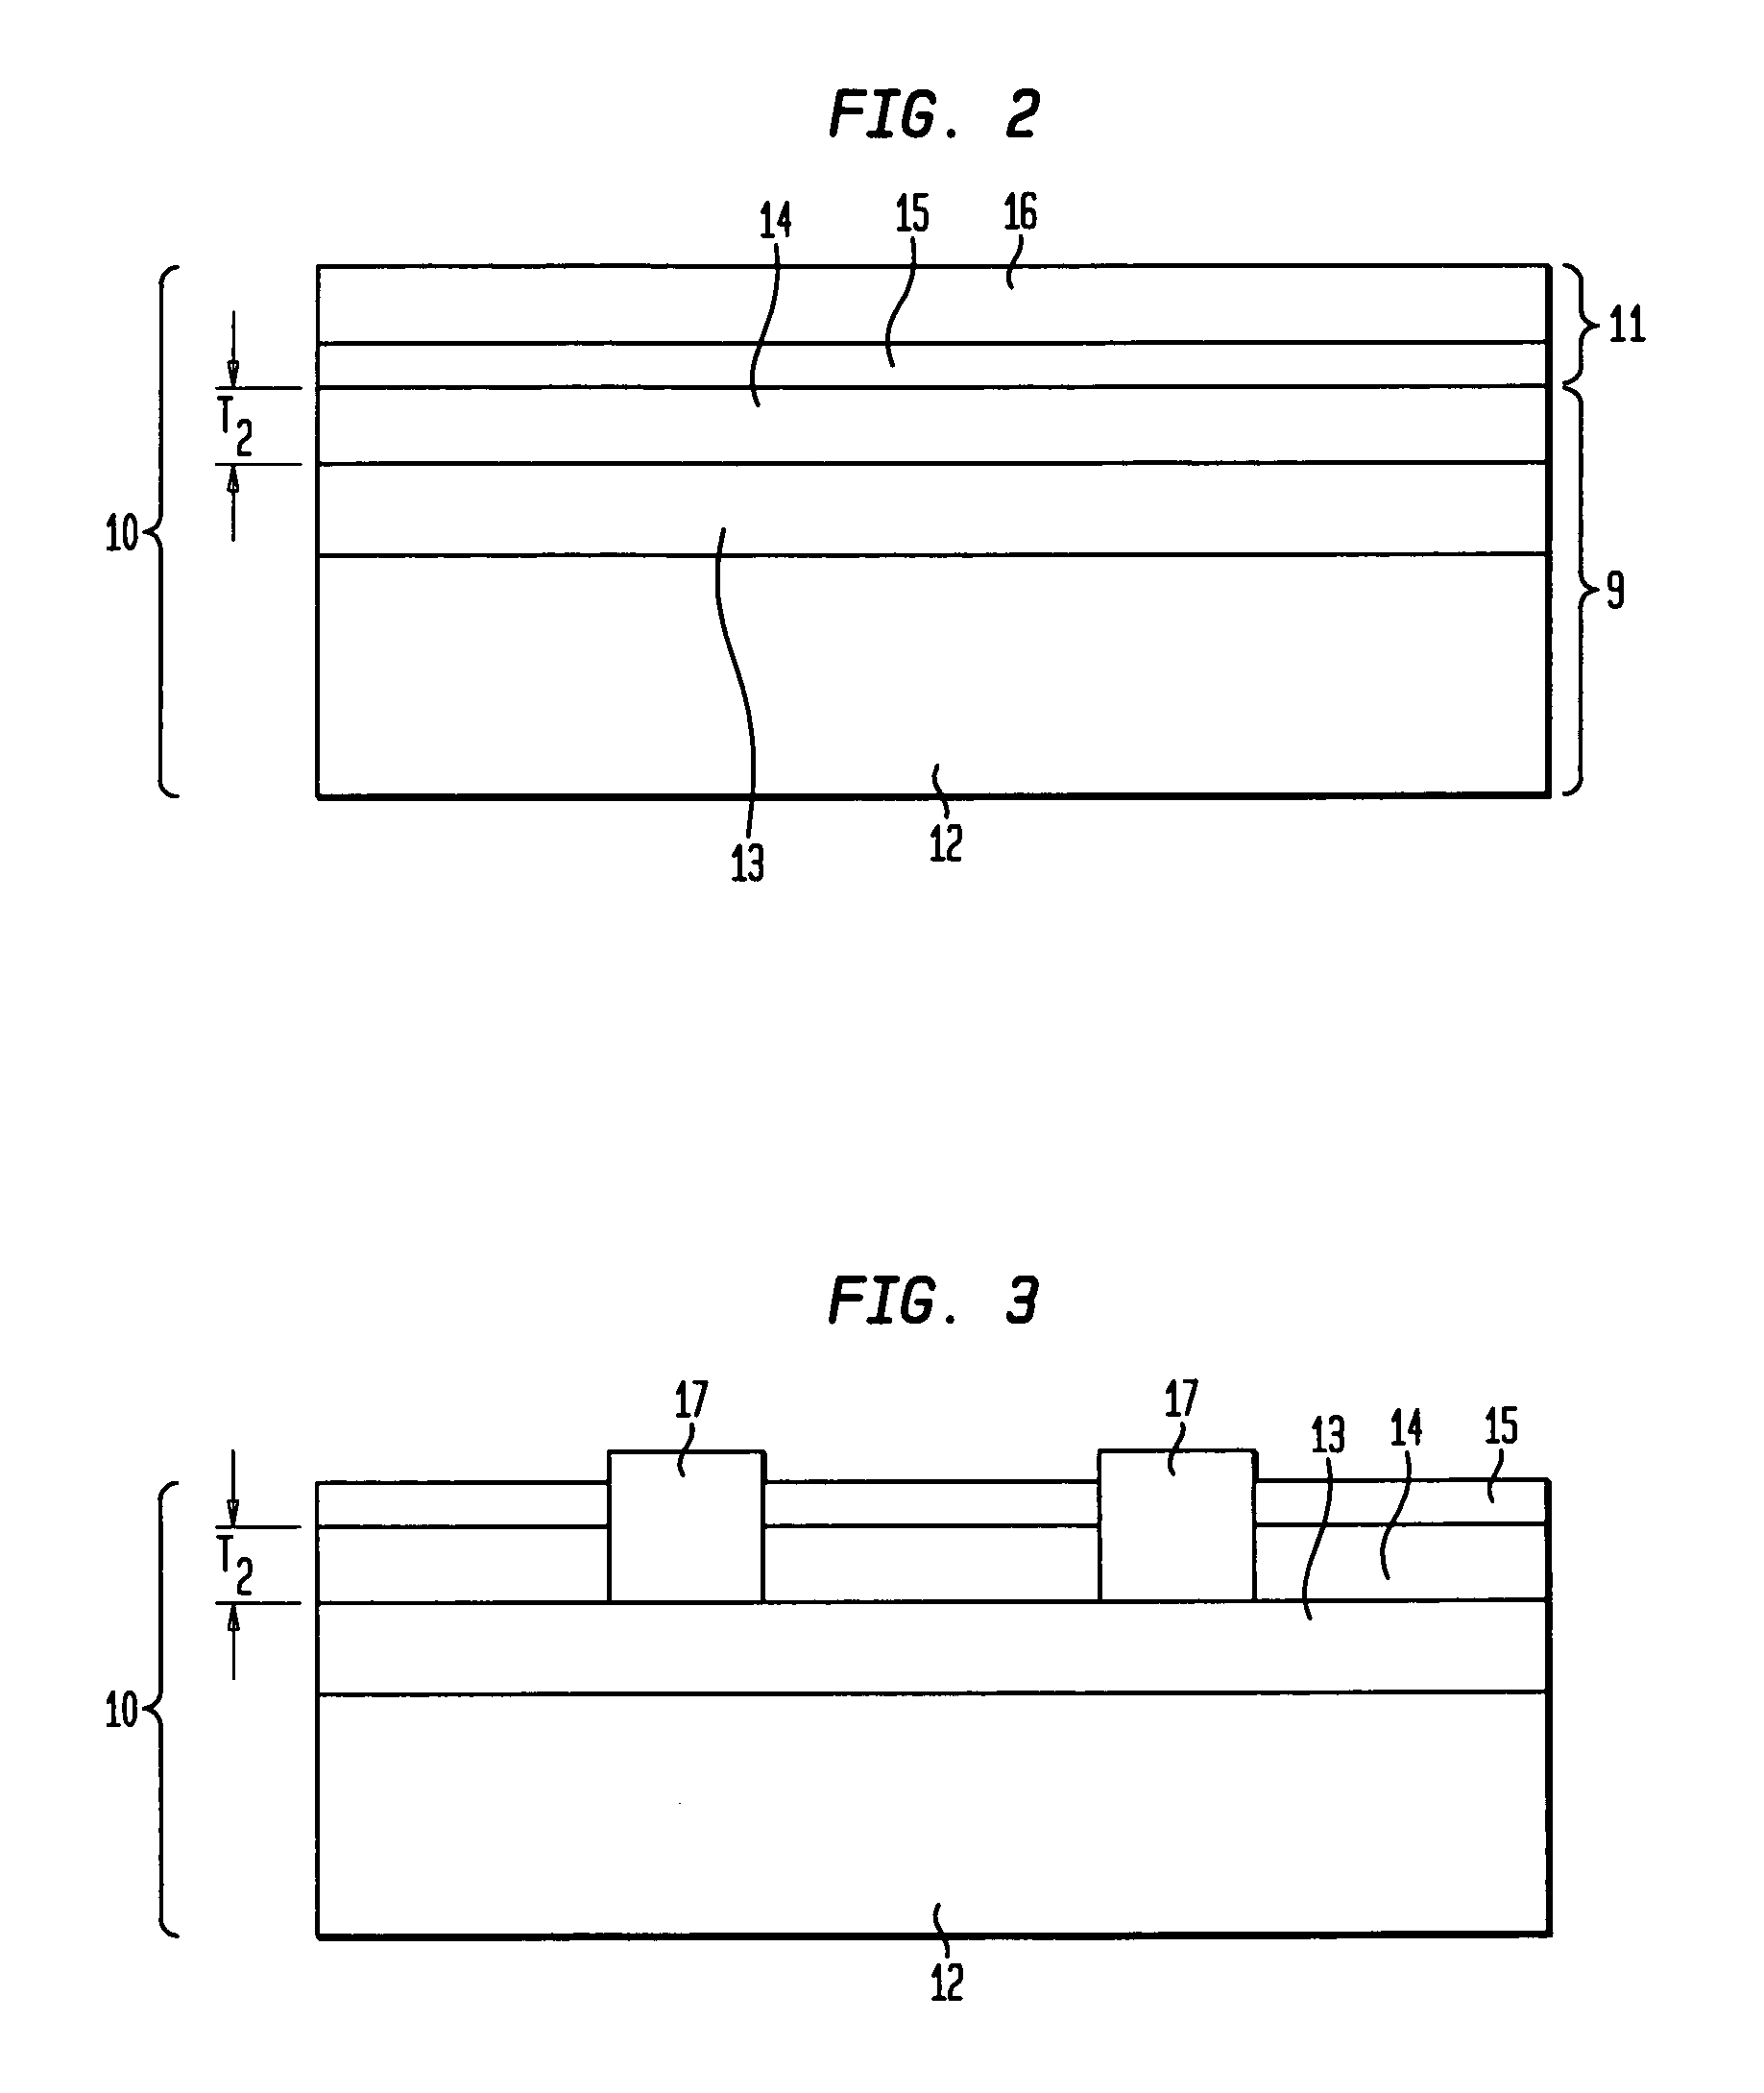 Ultra-thin Si channel MOSFET using a self-aligned oxygen implant and damascene technique